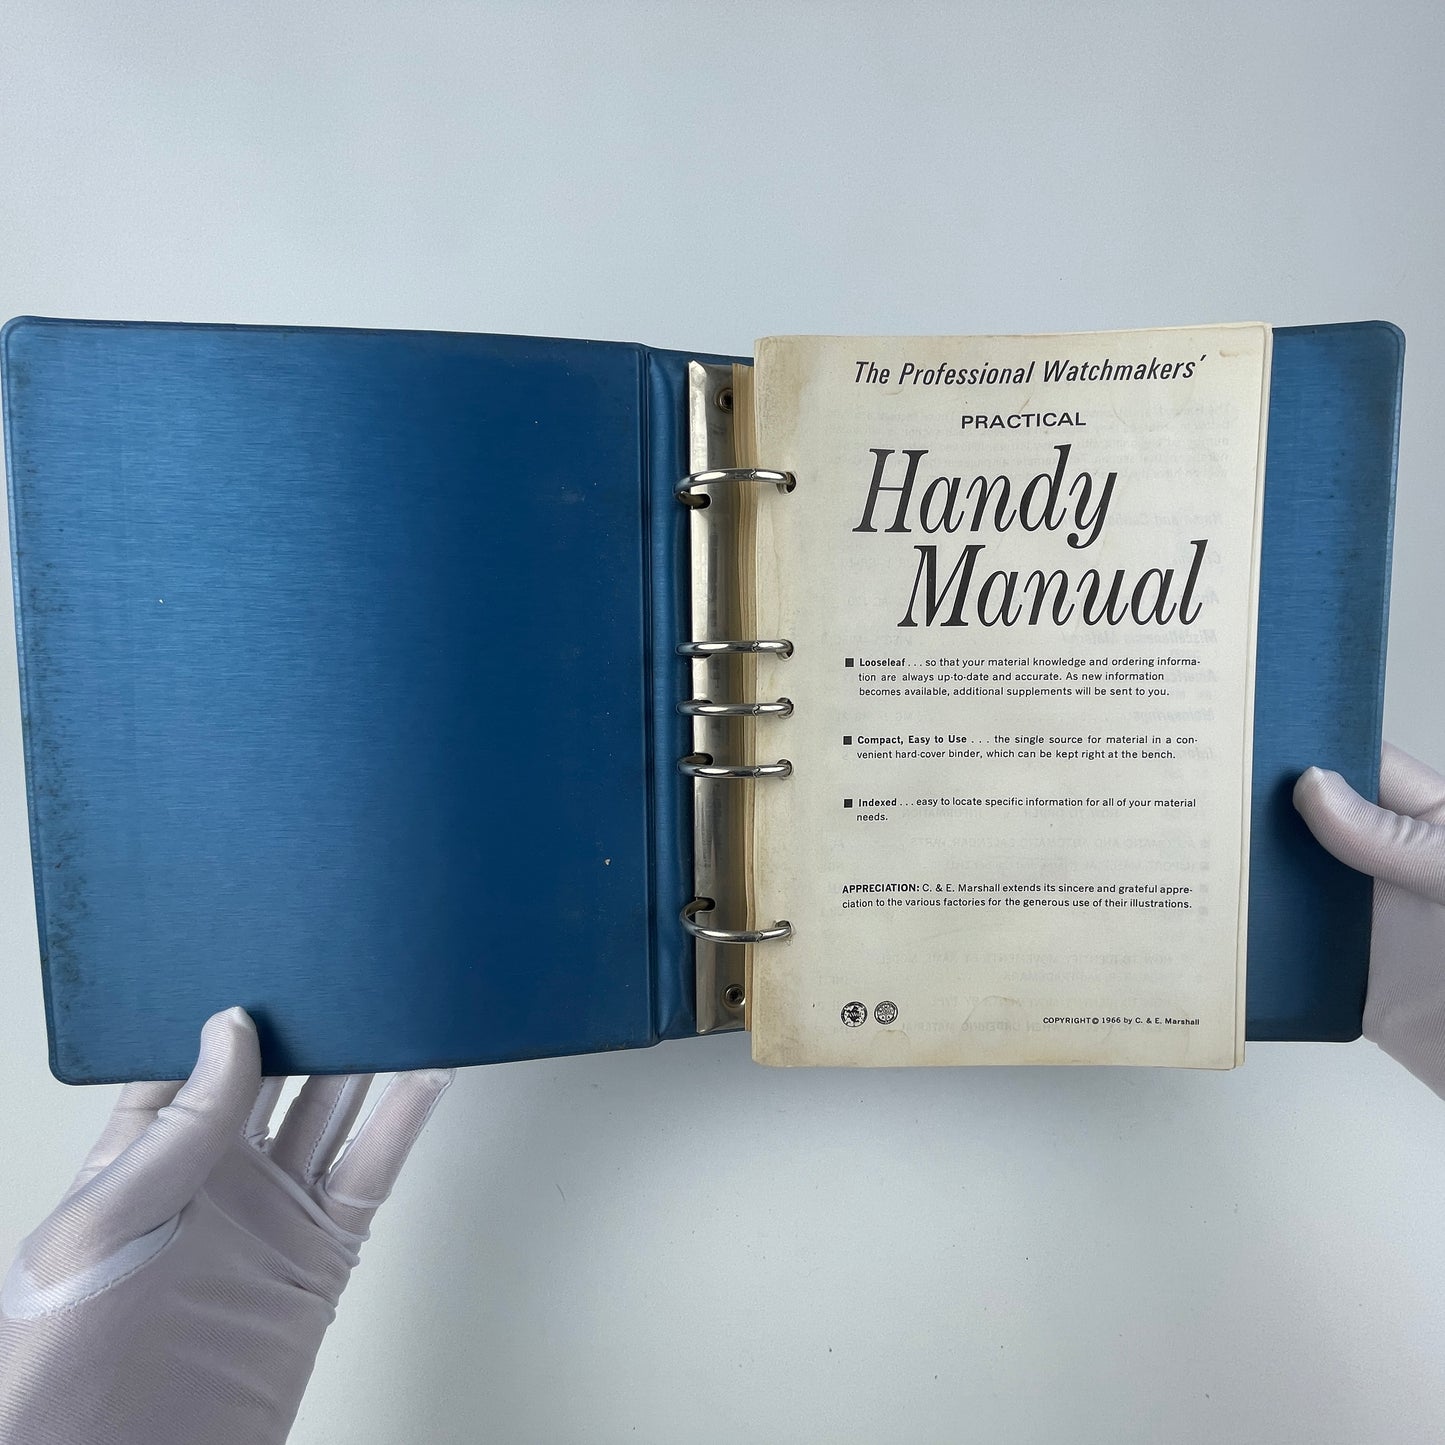 Oct Lot 59- C&E Marshall Professional Watchmakers’ Handy Manual